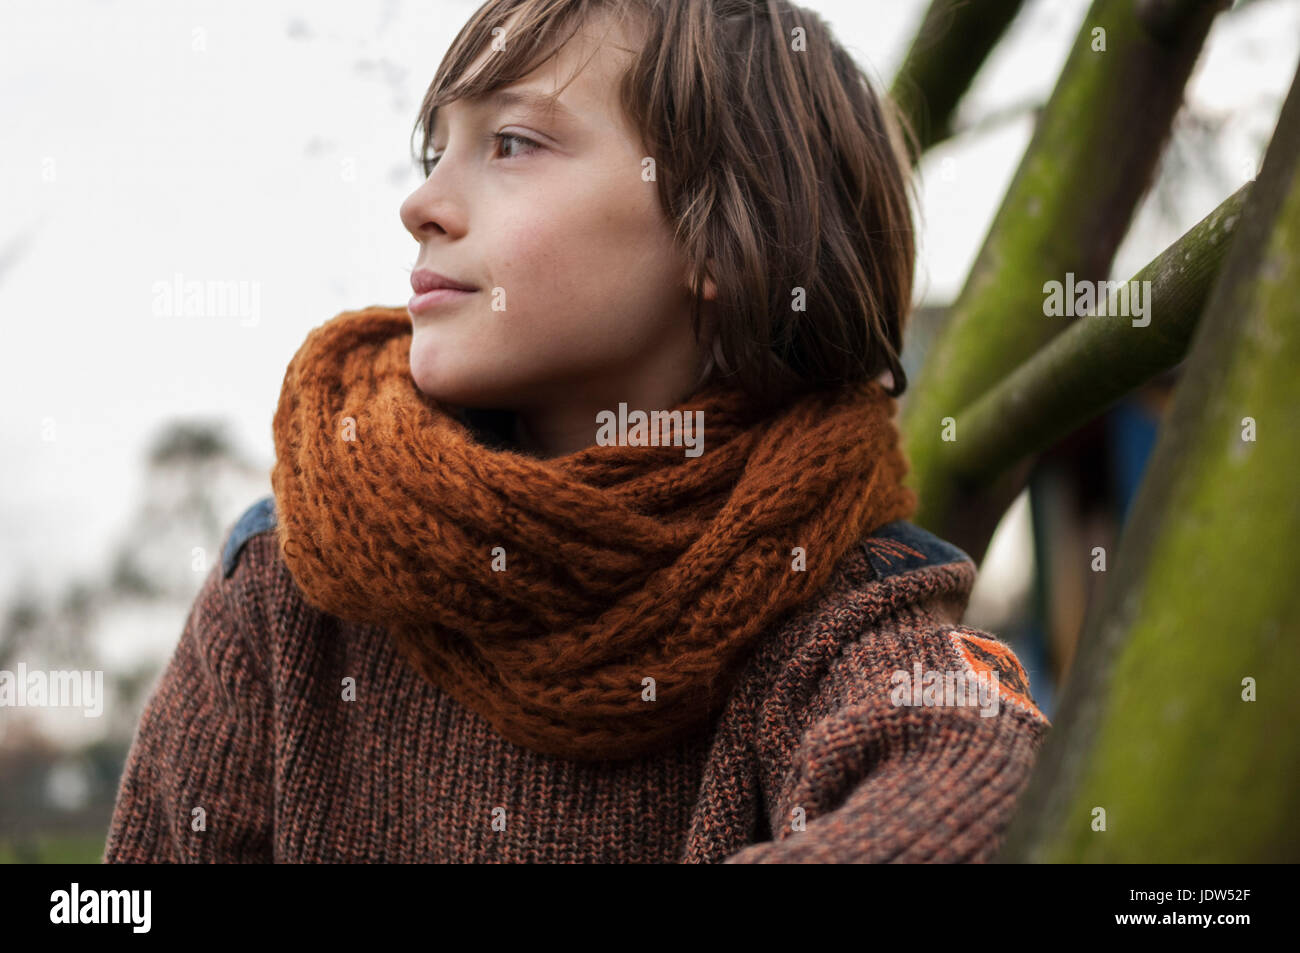 Boy in scarf looking away, outdoors Stock Photo